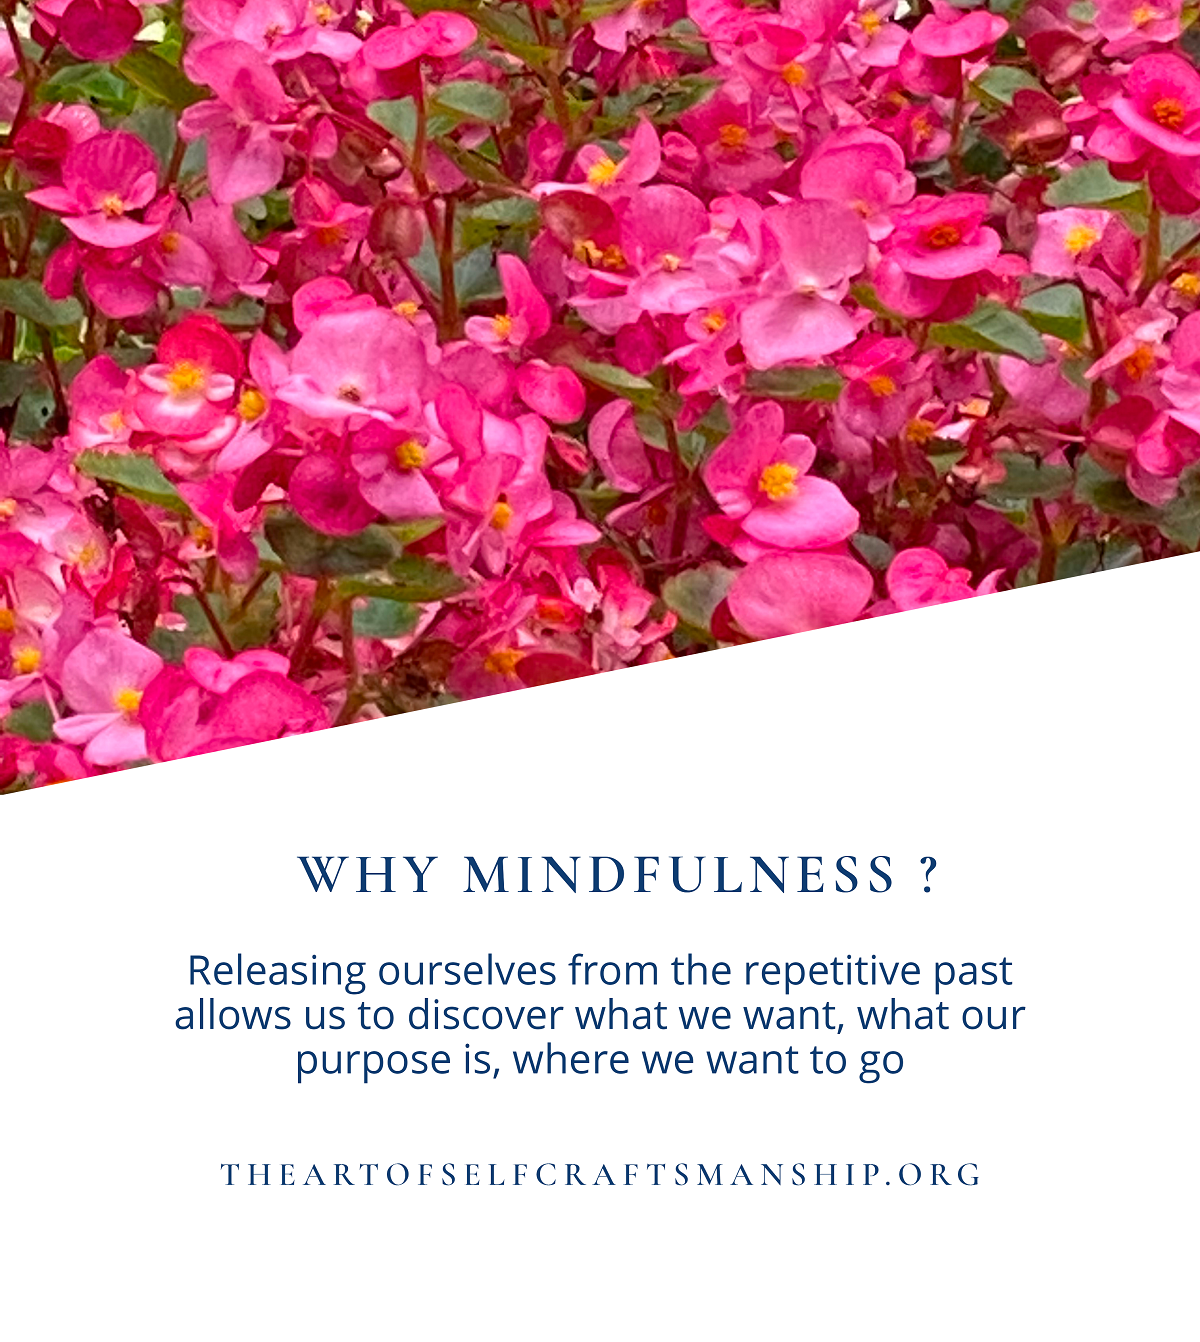 Why mindfulness? It takes discipline to make the decisions of what thoughts we choose to keep in our registry and which we choose to ignore.